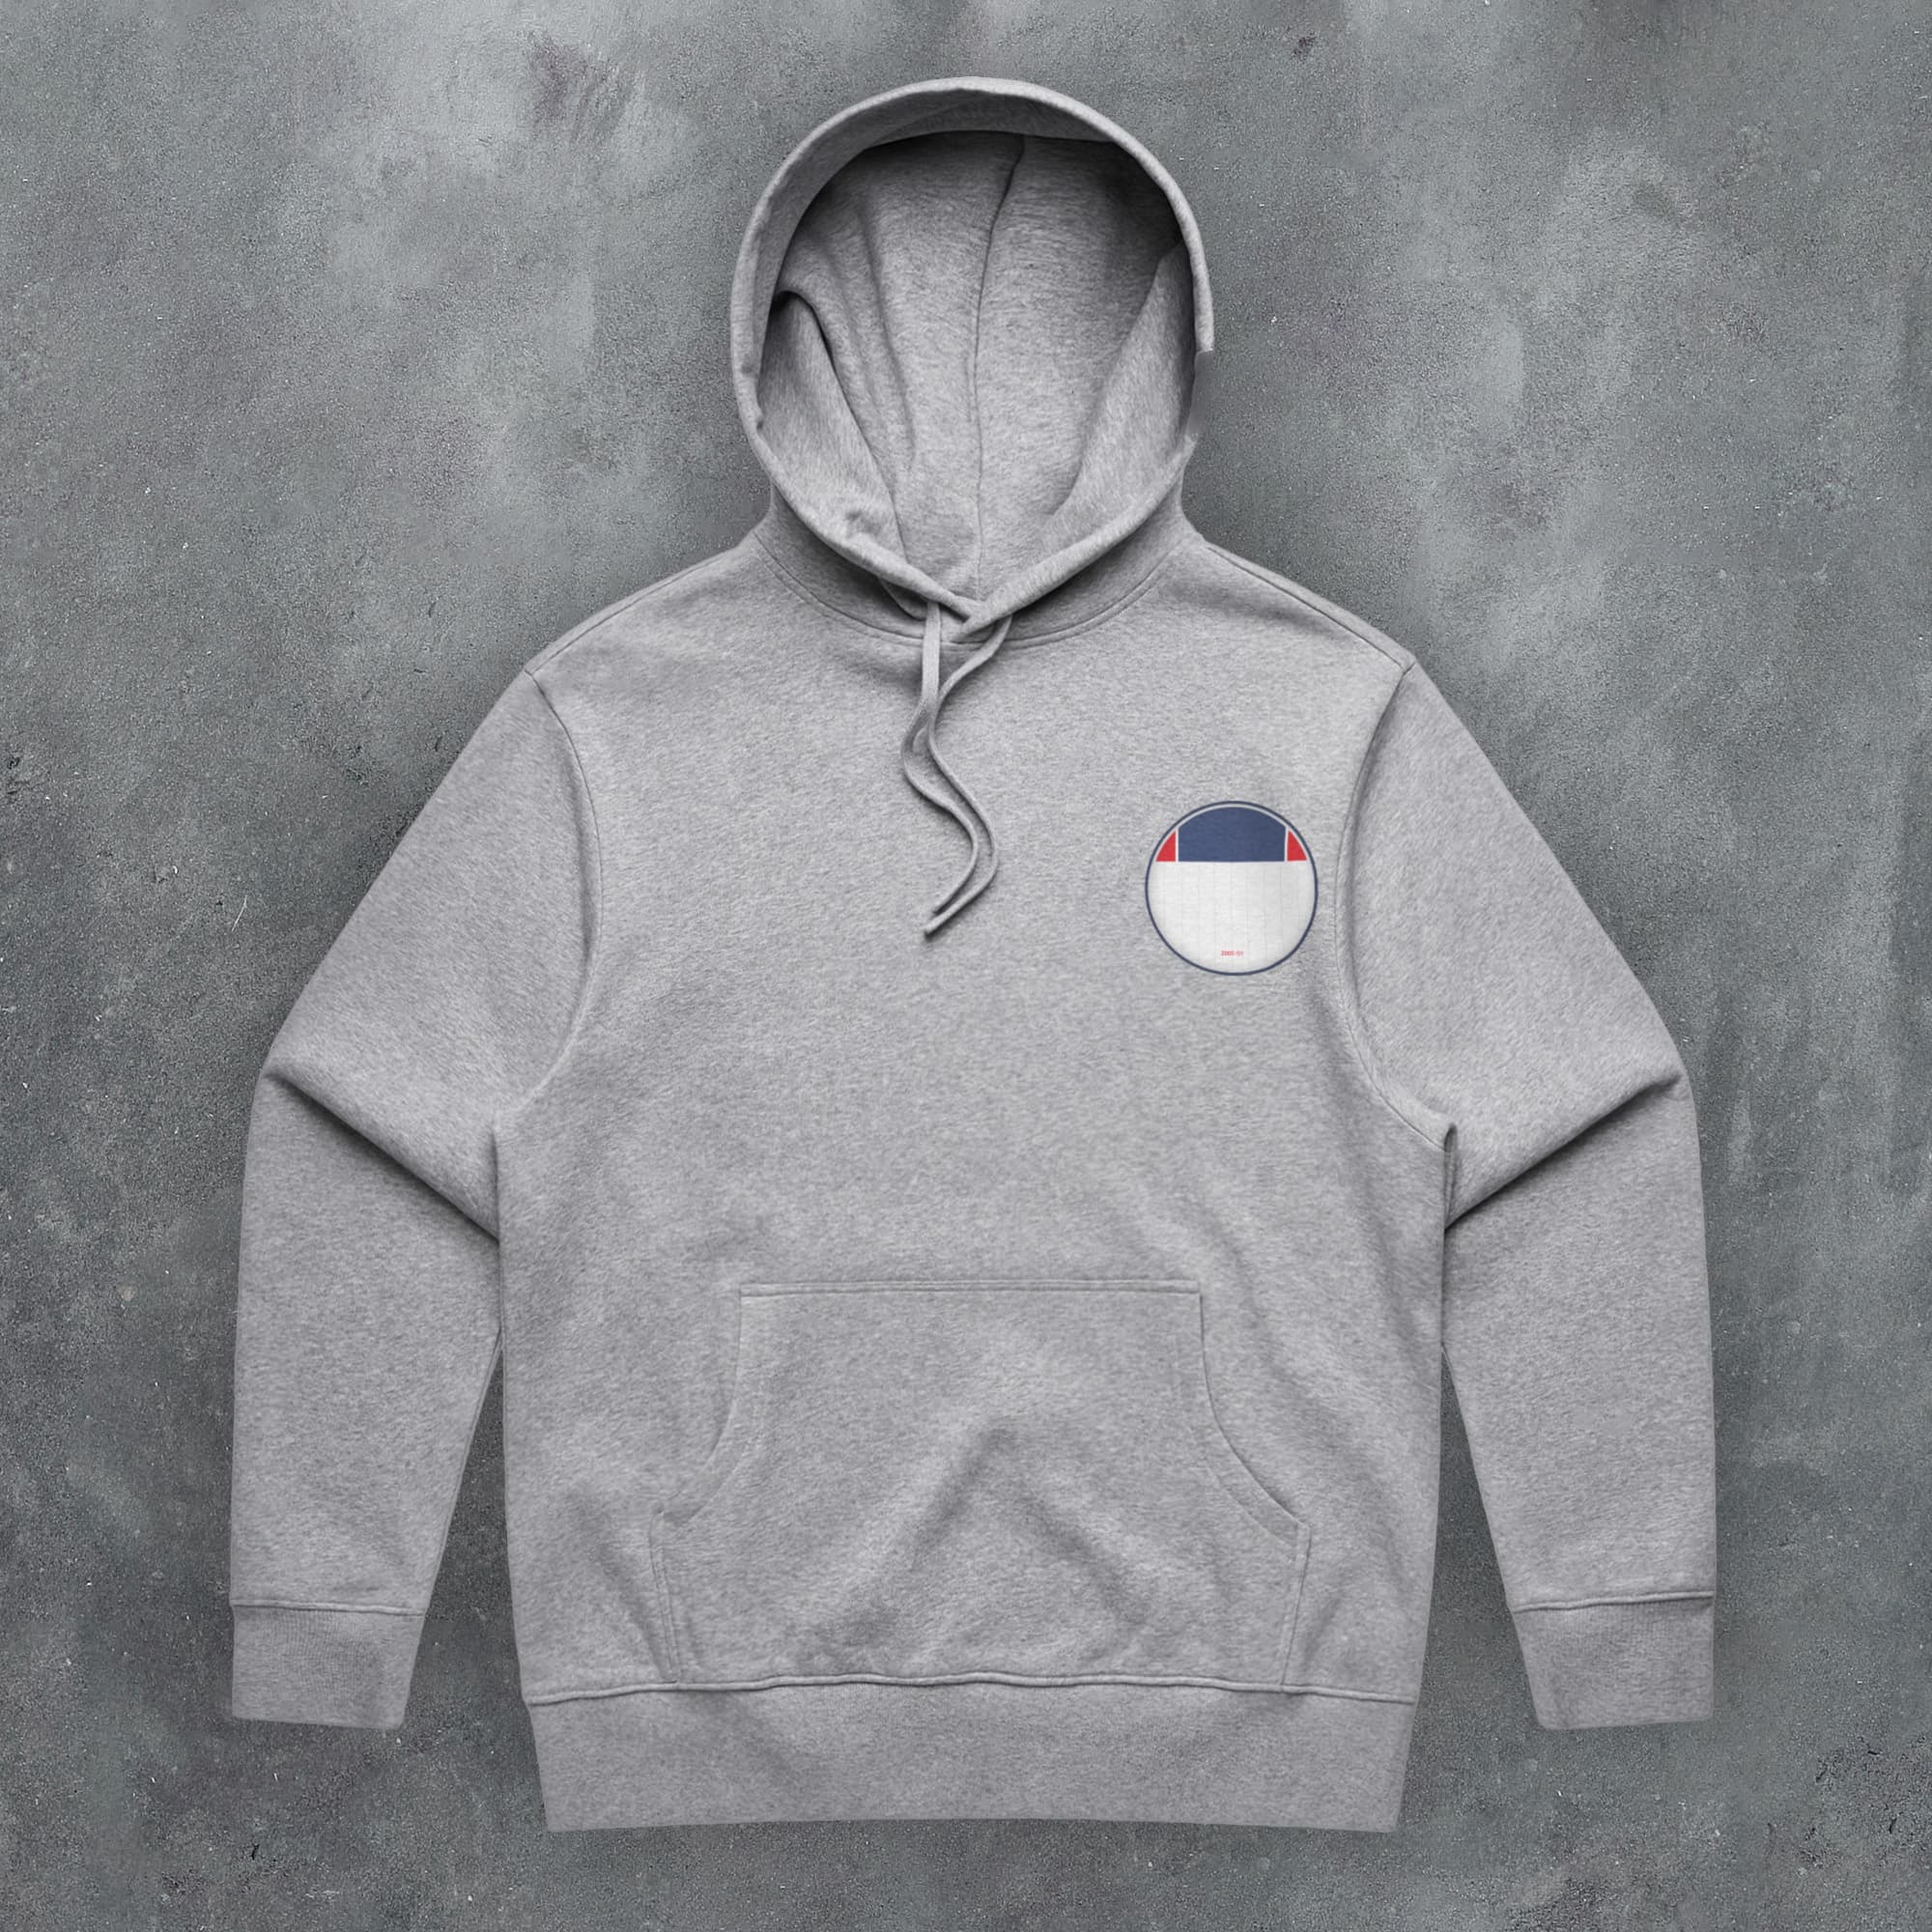 a grey hoodie with a white, blue, and red patch on it